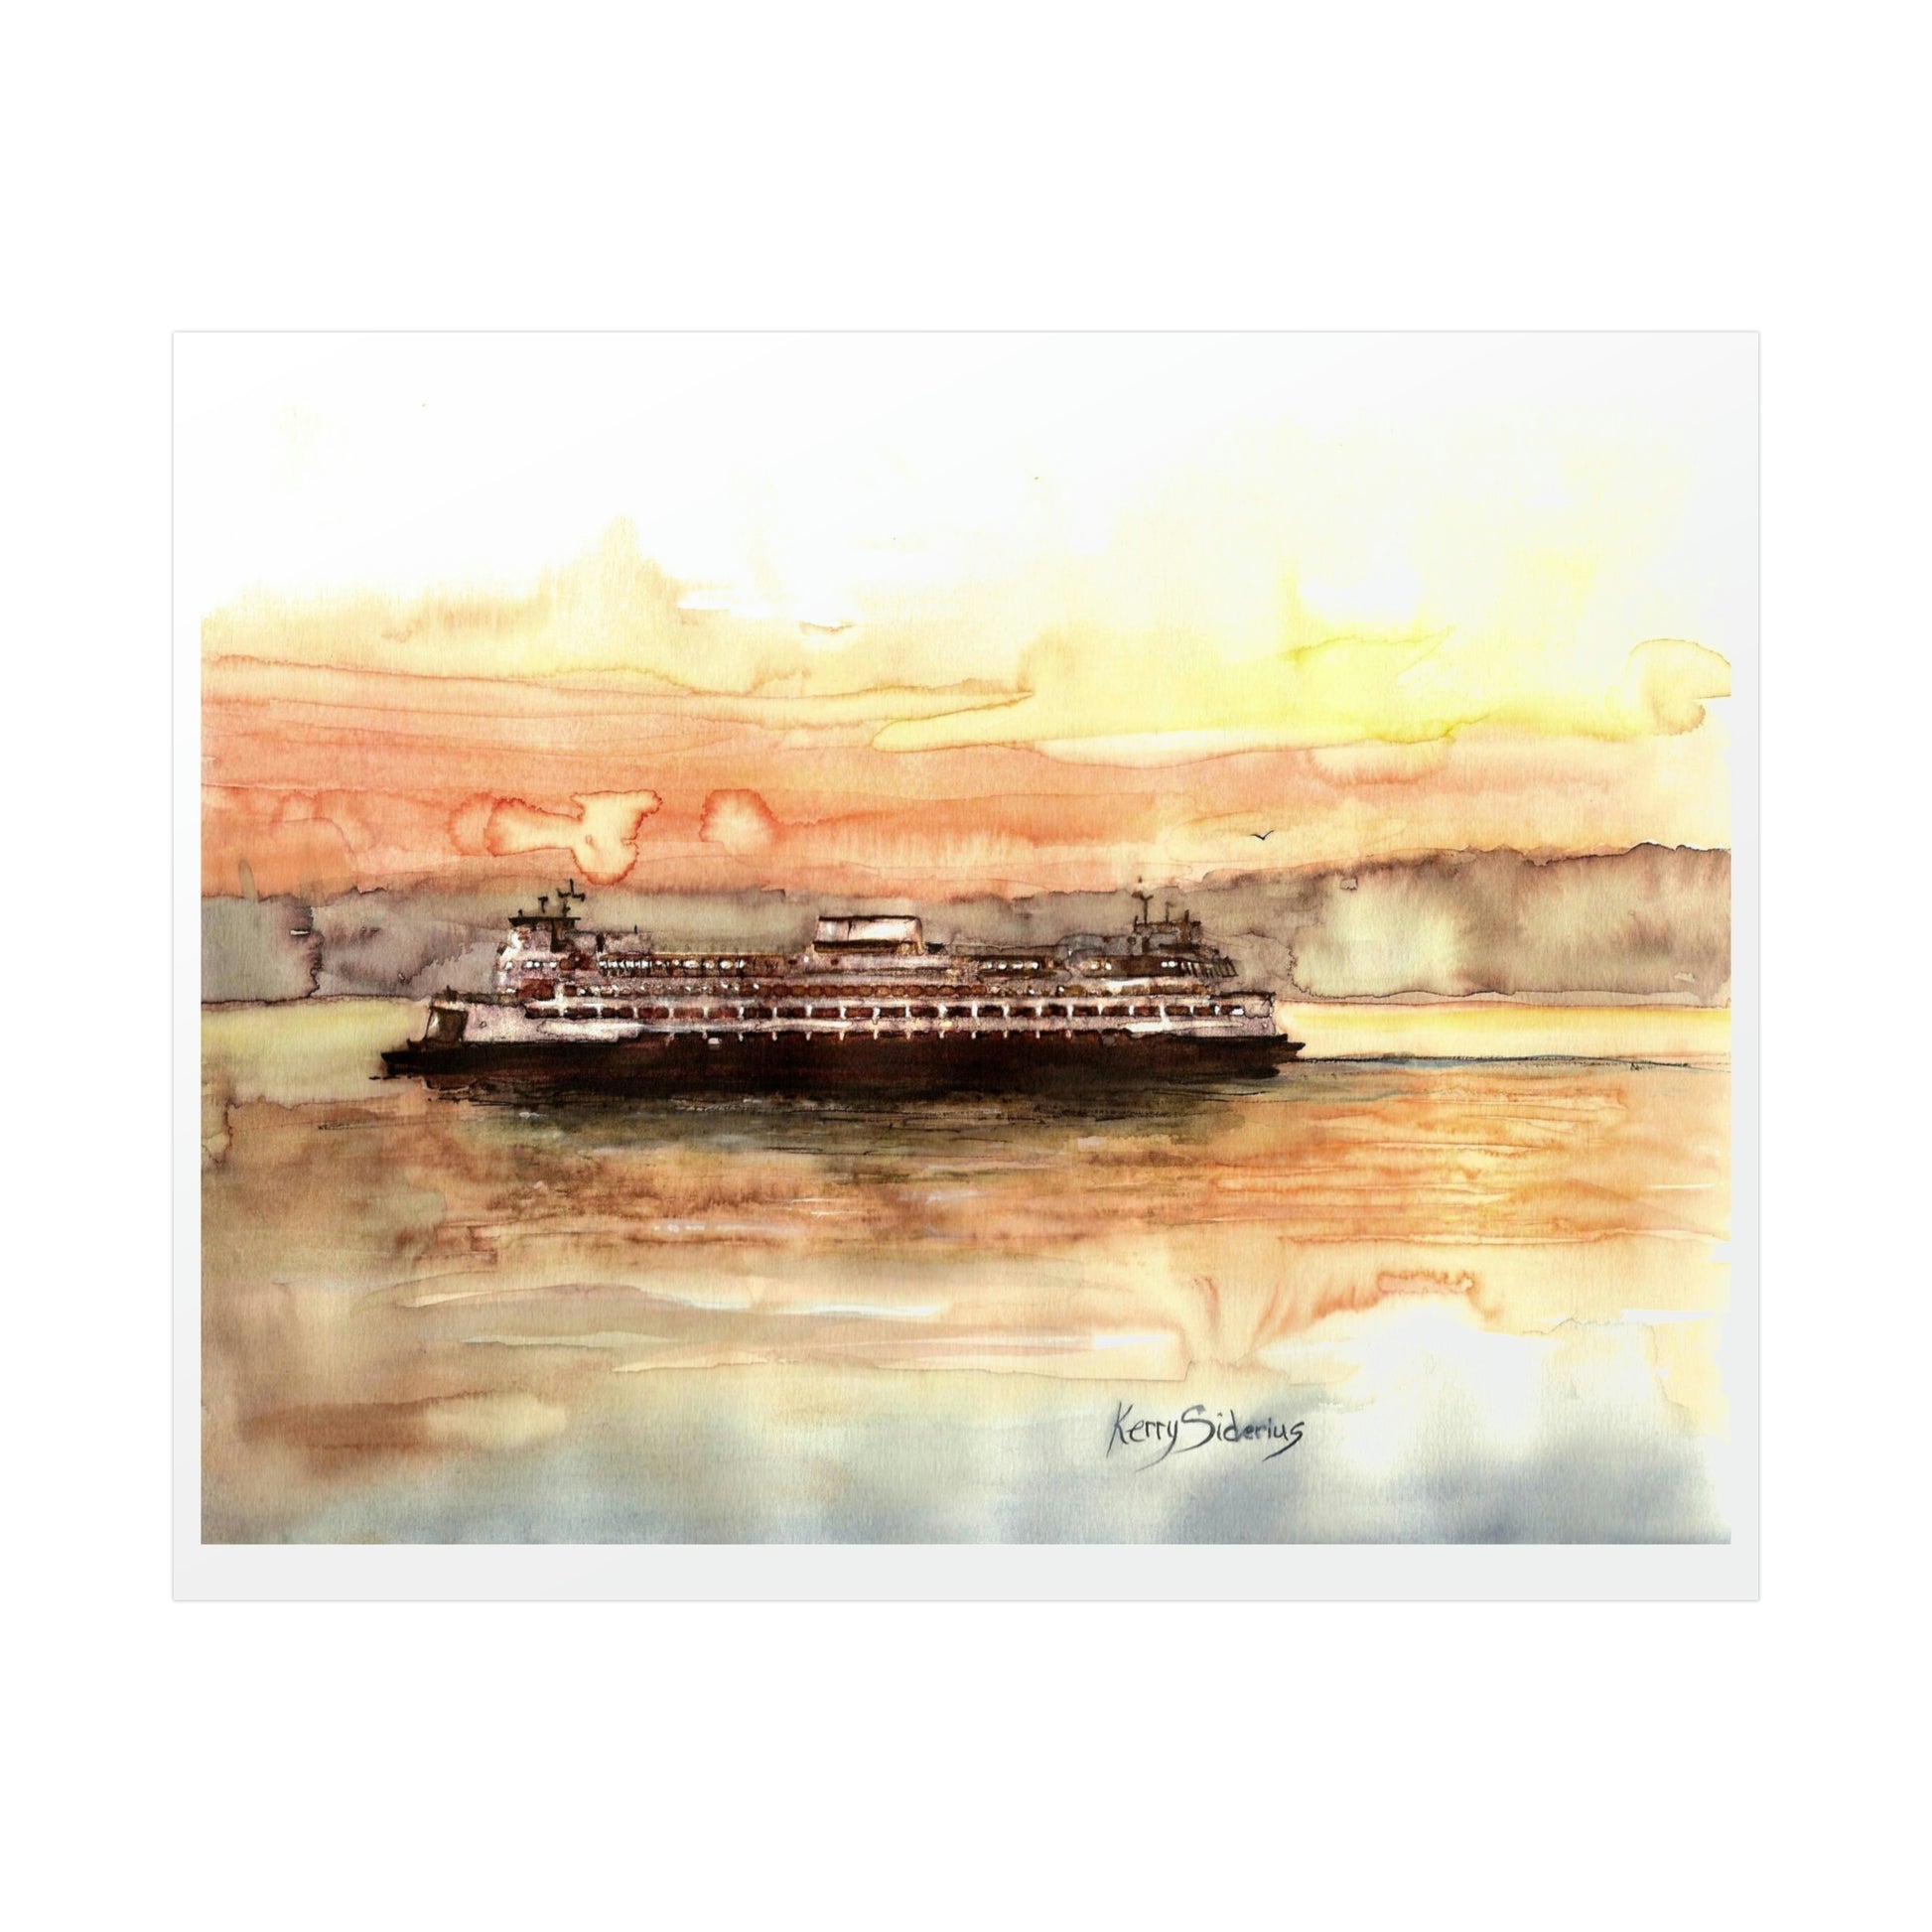 "Ferry to Seattle" Poster - Kerry Siderius Art 